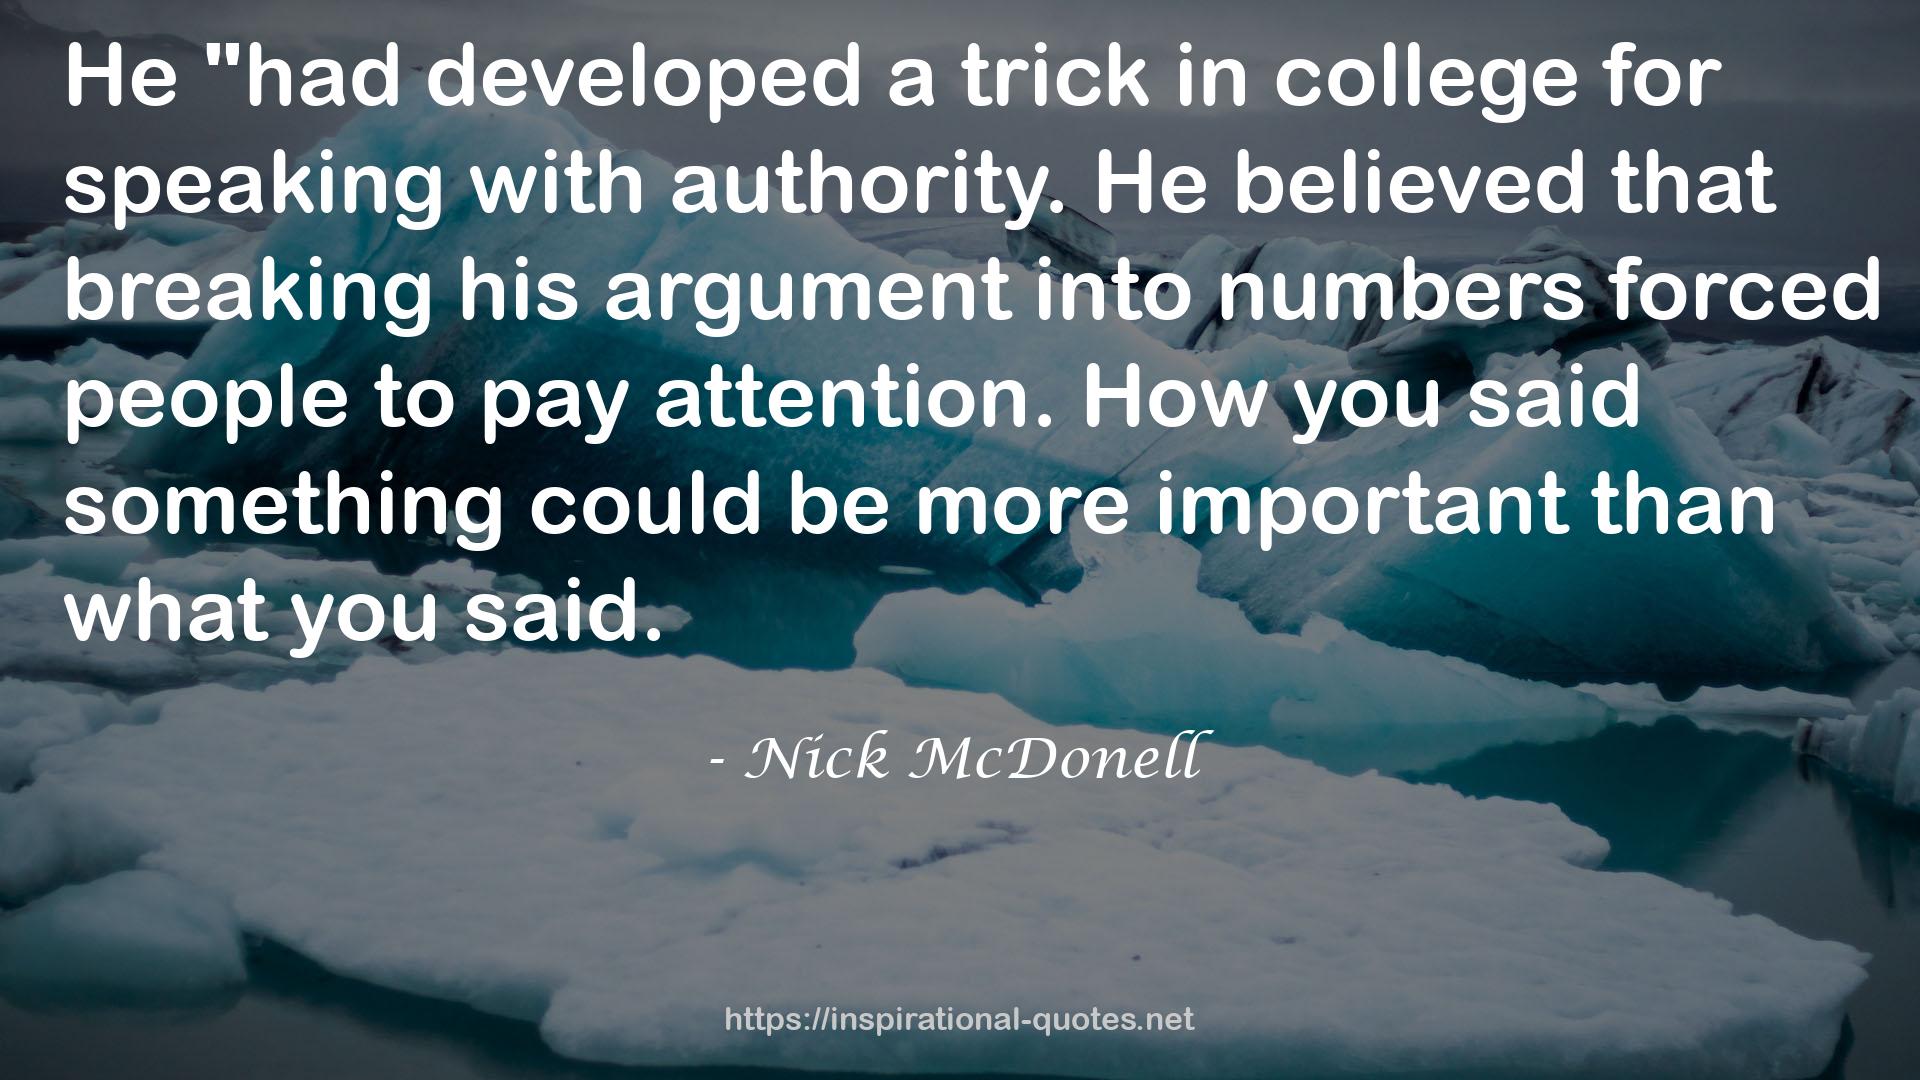 Nick McDonell QUOTES